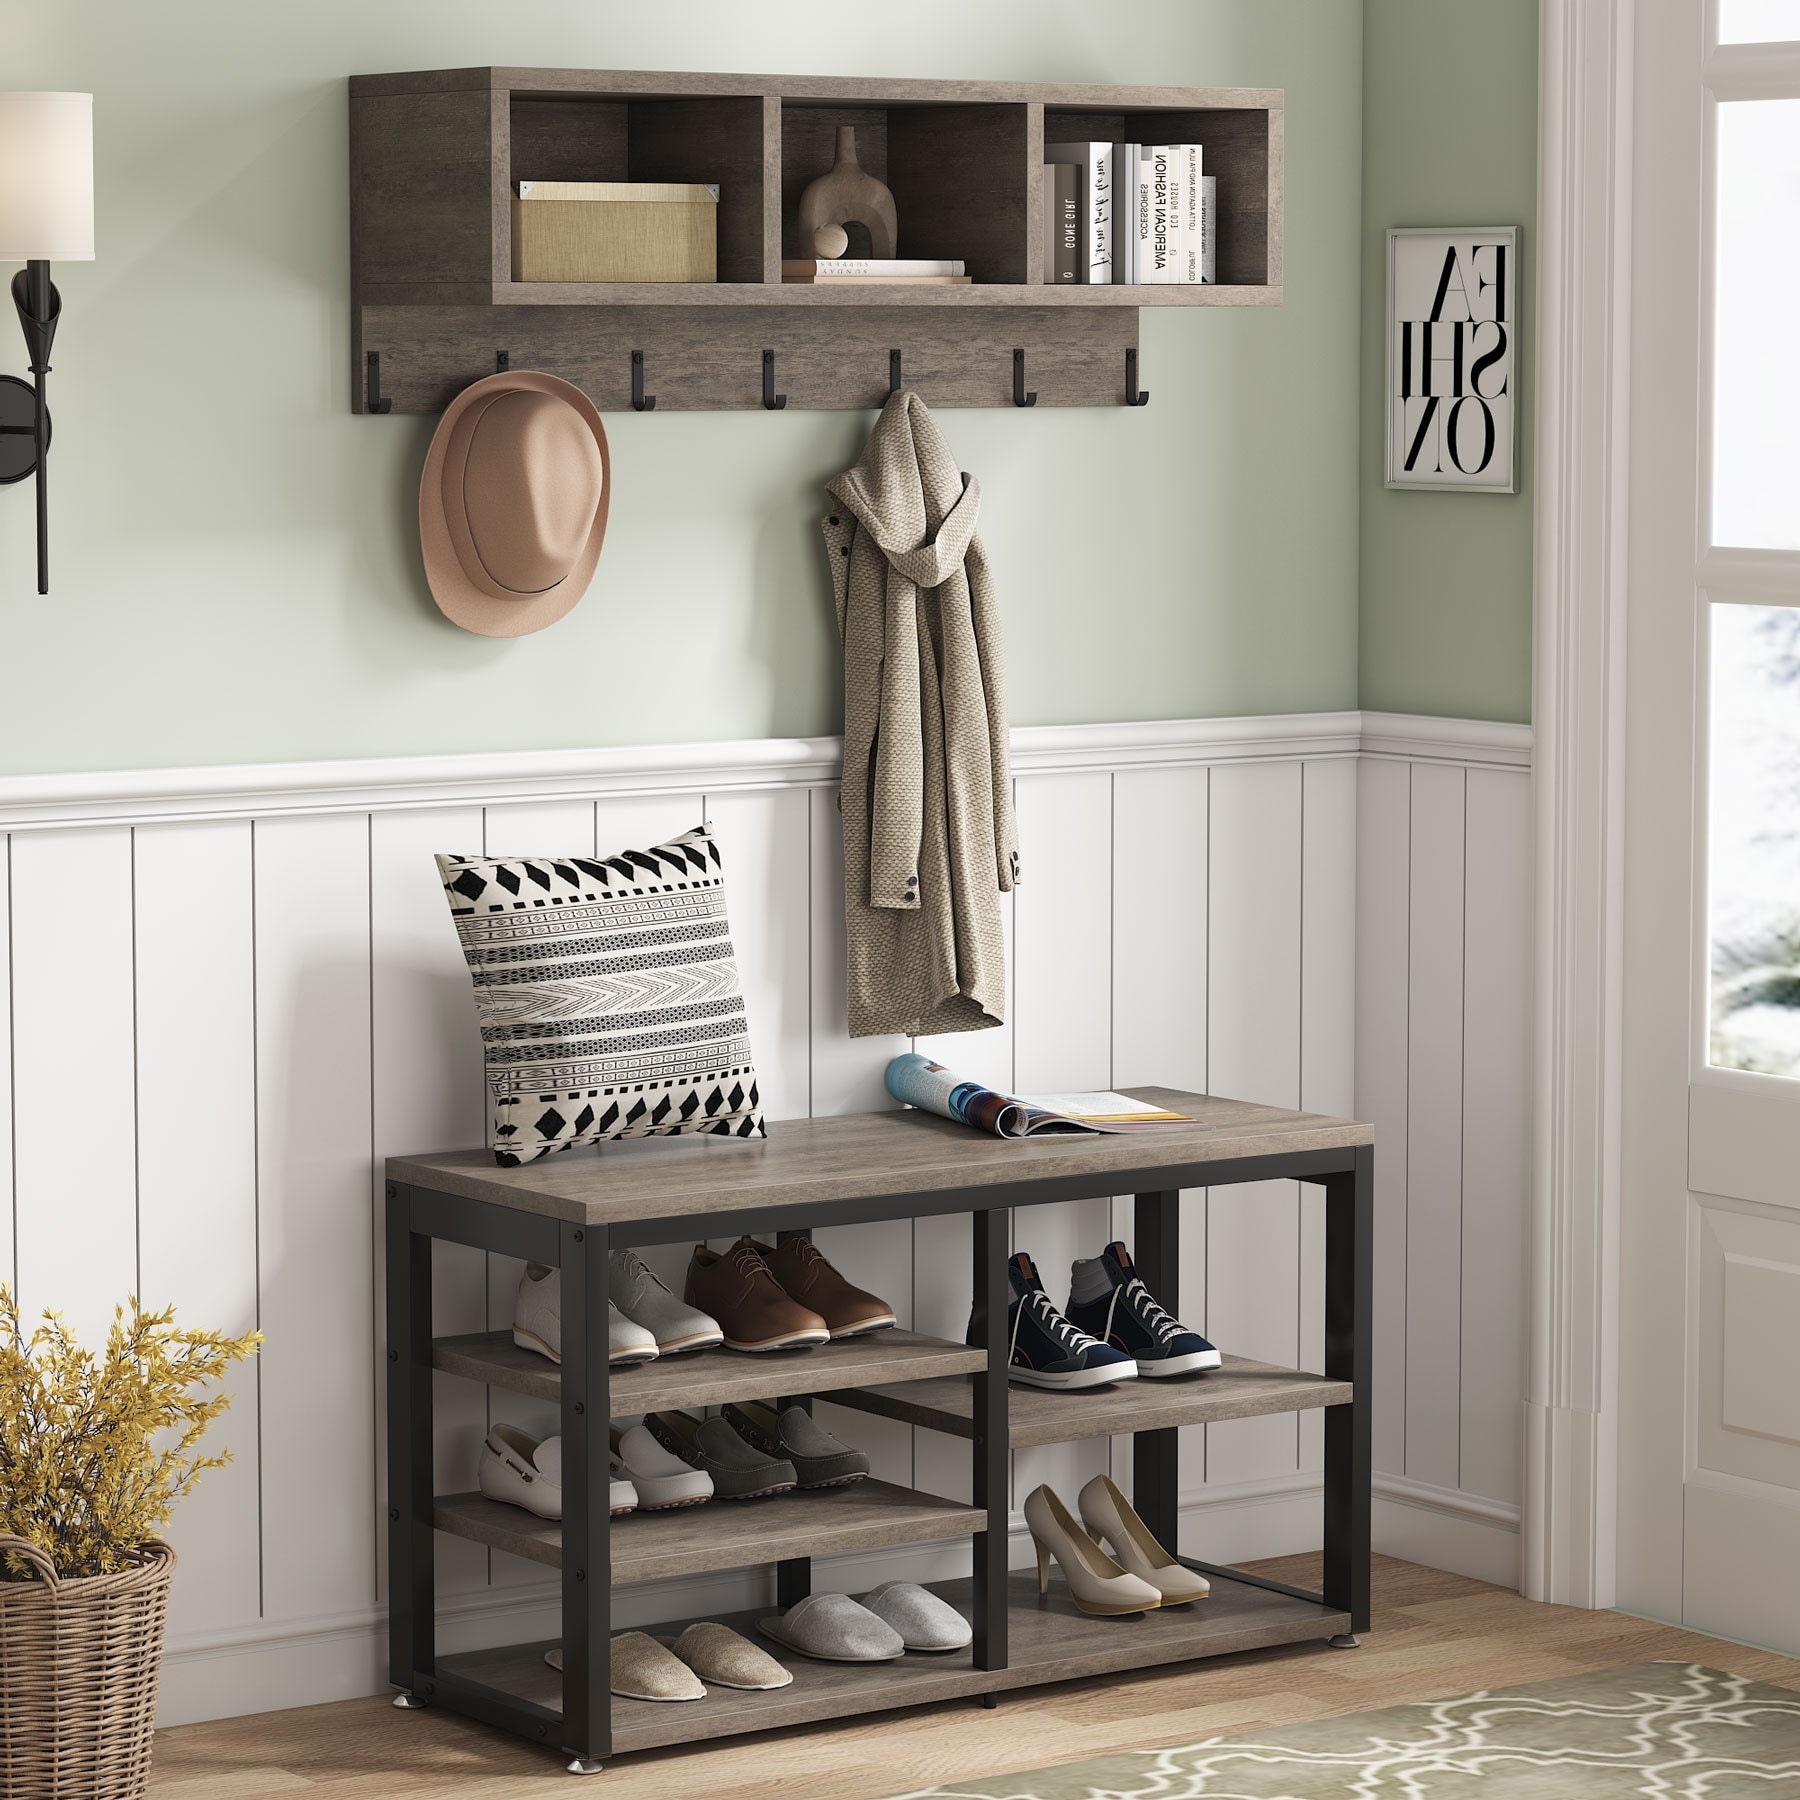 https://ak1.ostkcdn.com/images/products/is/images/direct/06e3fe711638d32d65245d0986fe1efce61d9418/Hall-Tree-with-Bench%2C-Shoe-Storage-and-Coat-Rack.jpg